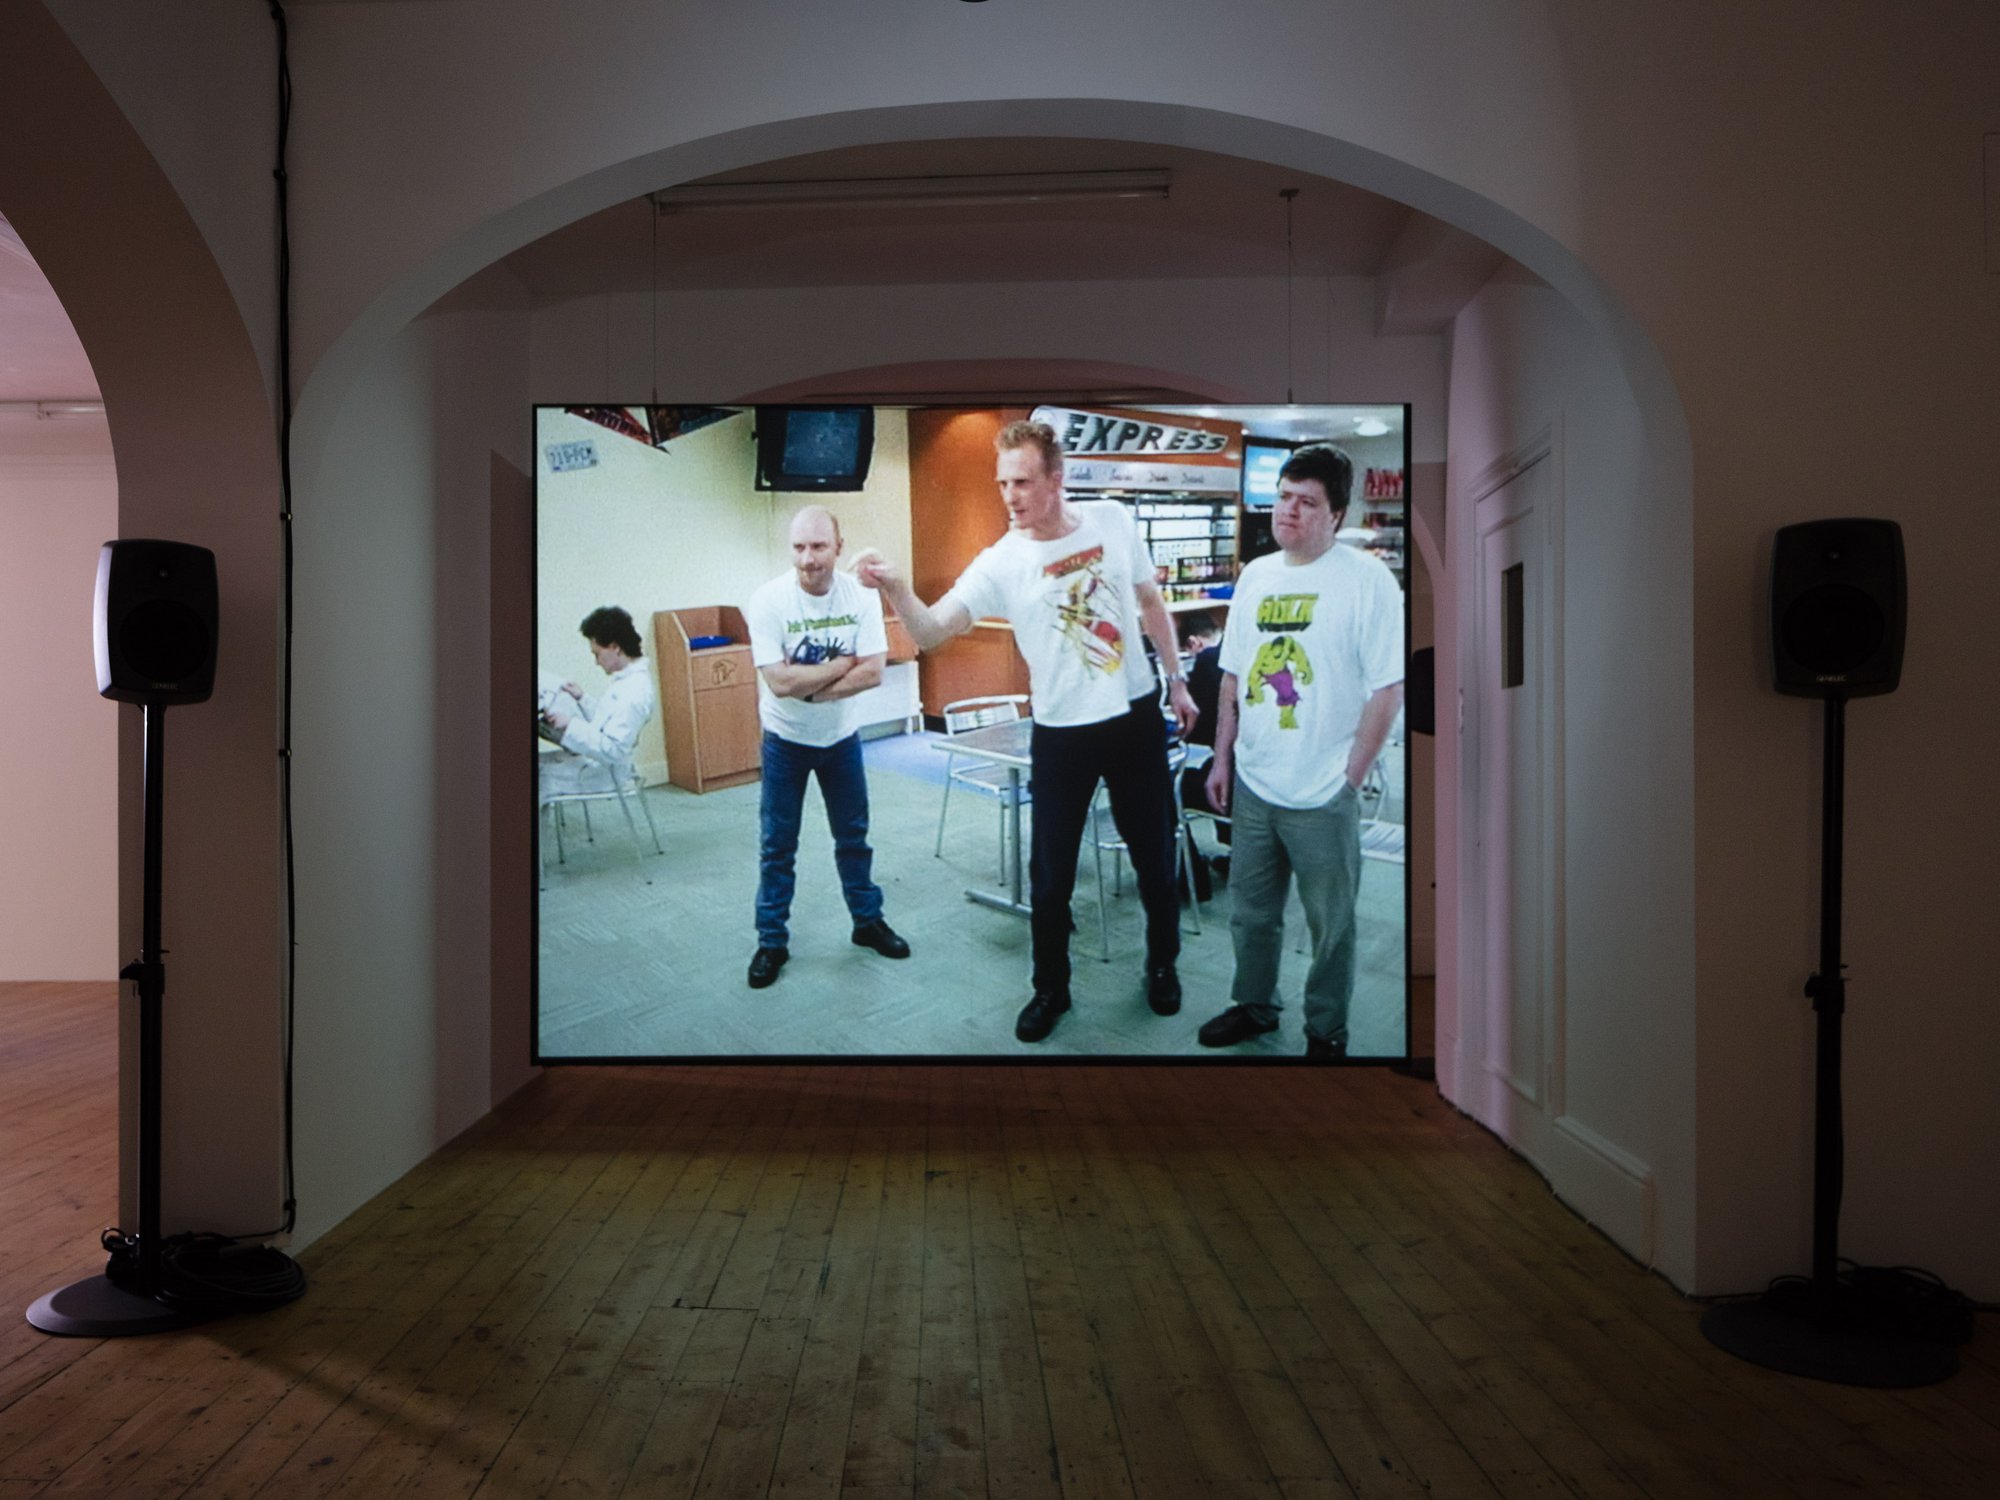 Mark Aerial Waller, Glow Boys, 2-channel video with parametric speakers, 14 min. and 19 min., 1999. Installation view, Leave nothing behind but your footprints and take nothing but your time, RODEO, London, 2018